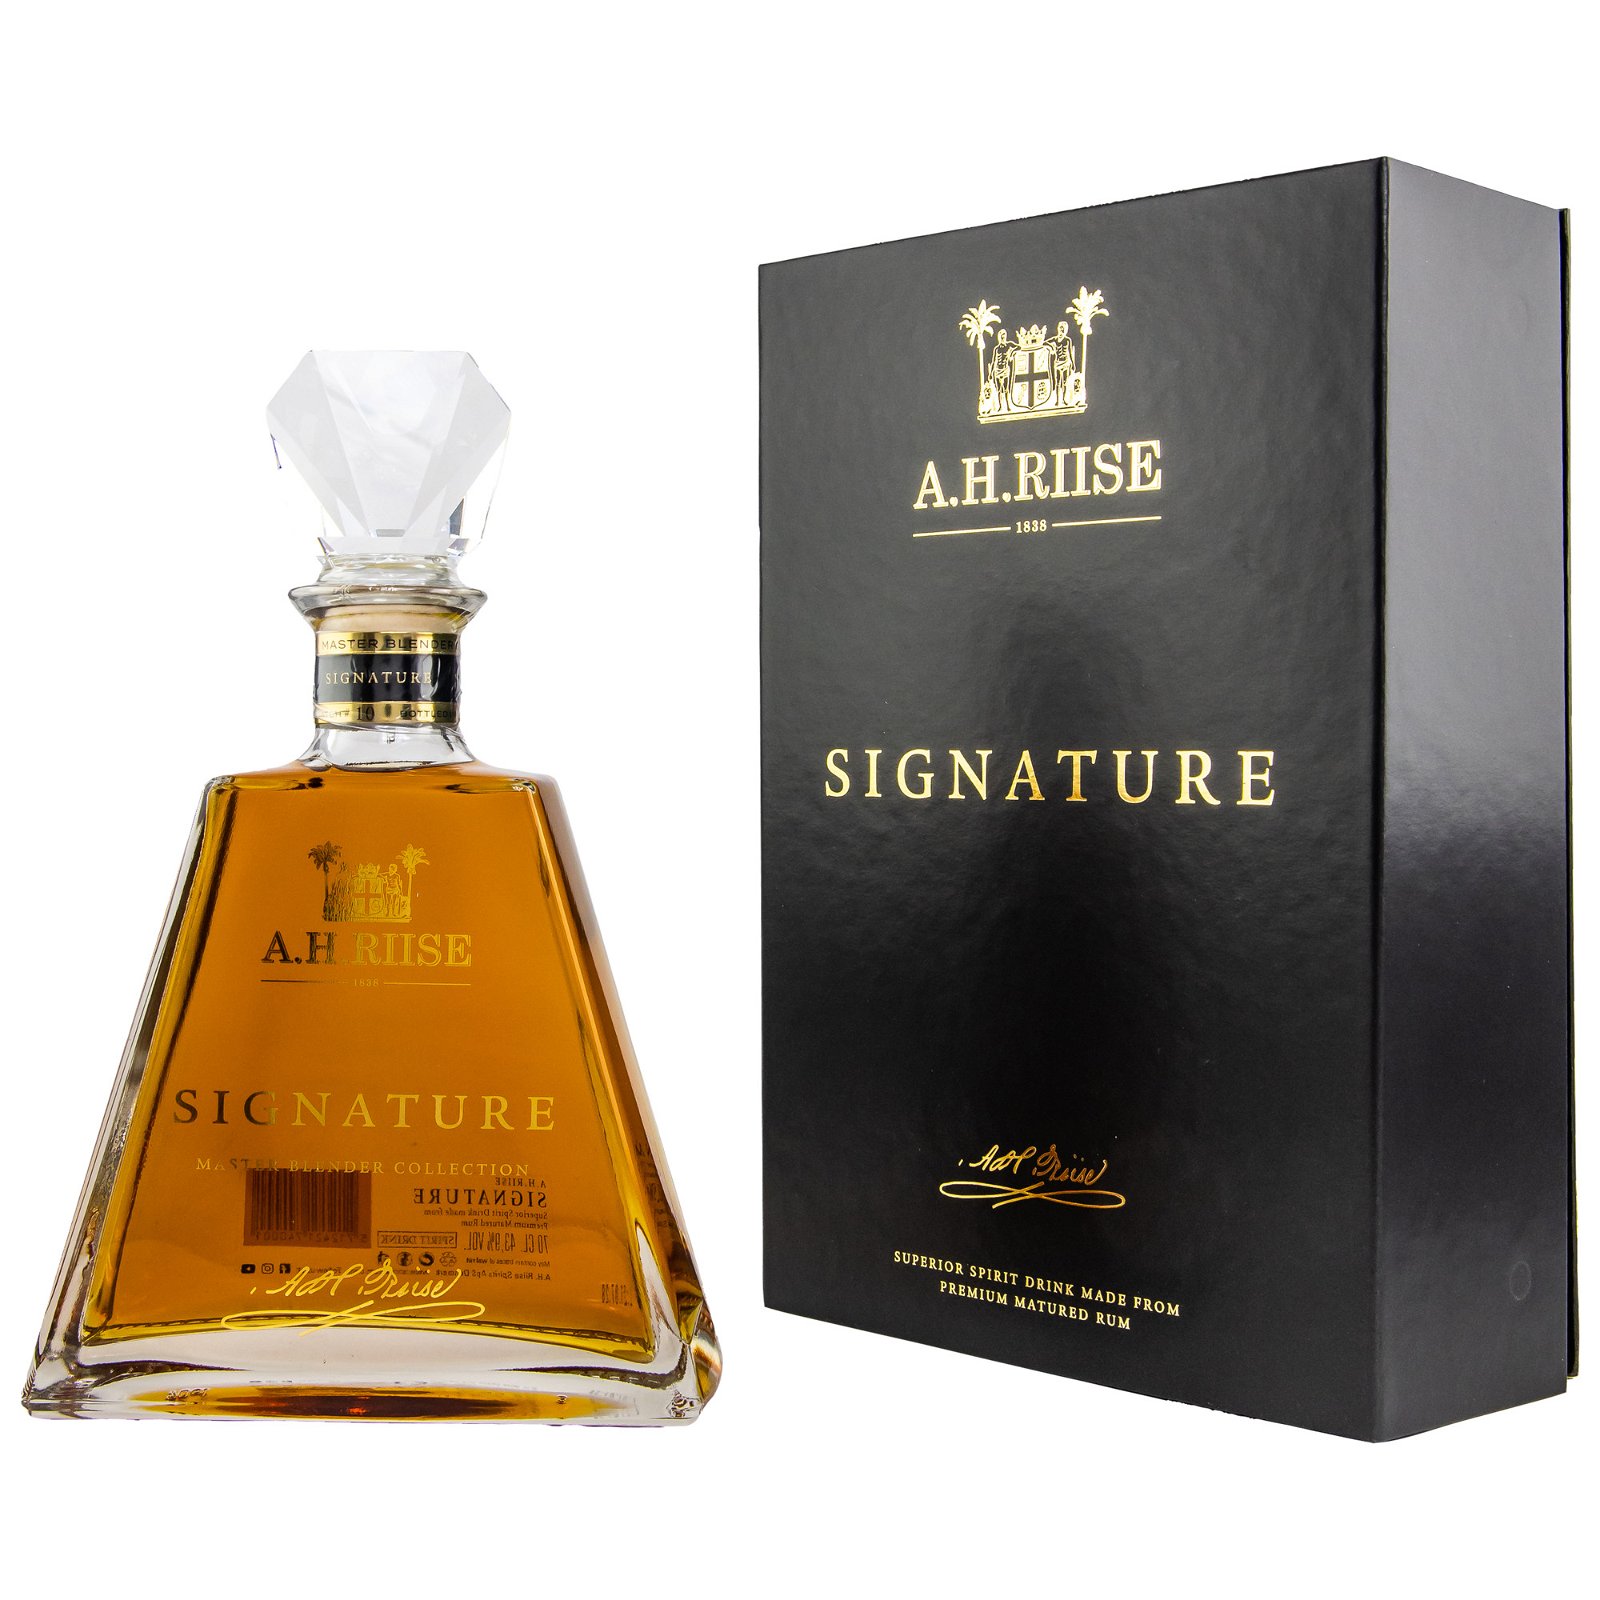 A. H. Riise Signature Master Blender Collection Batch #10